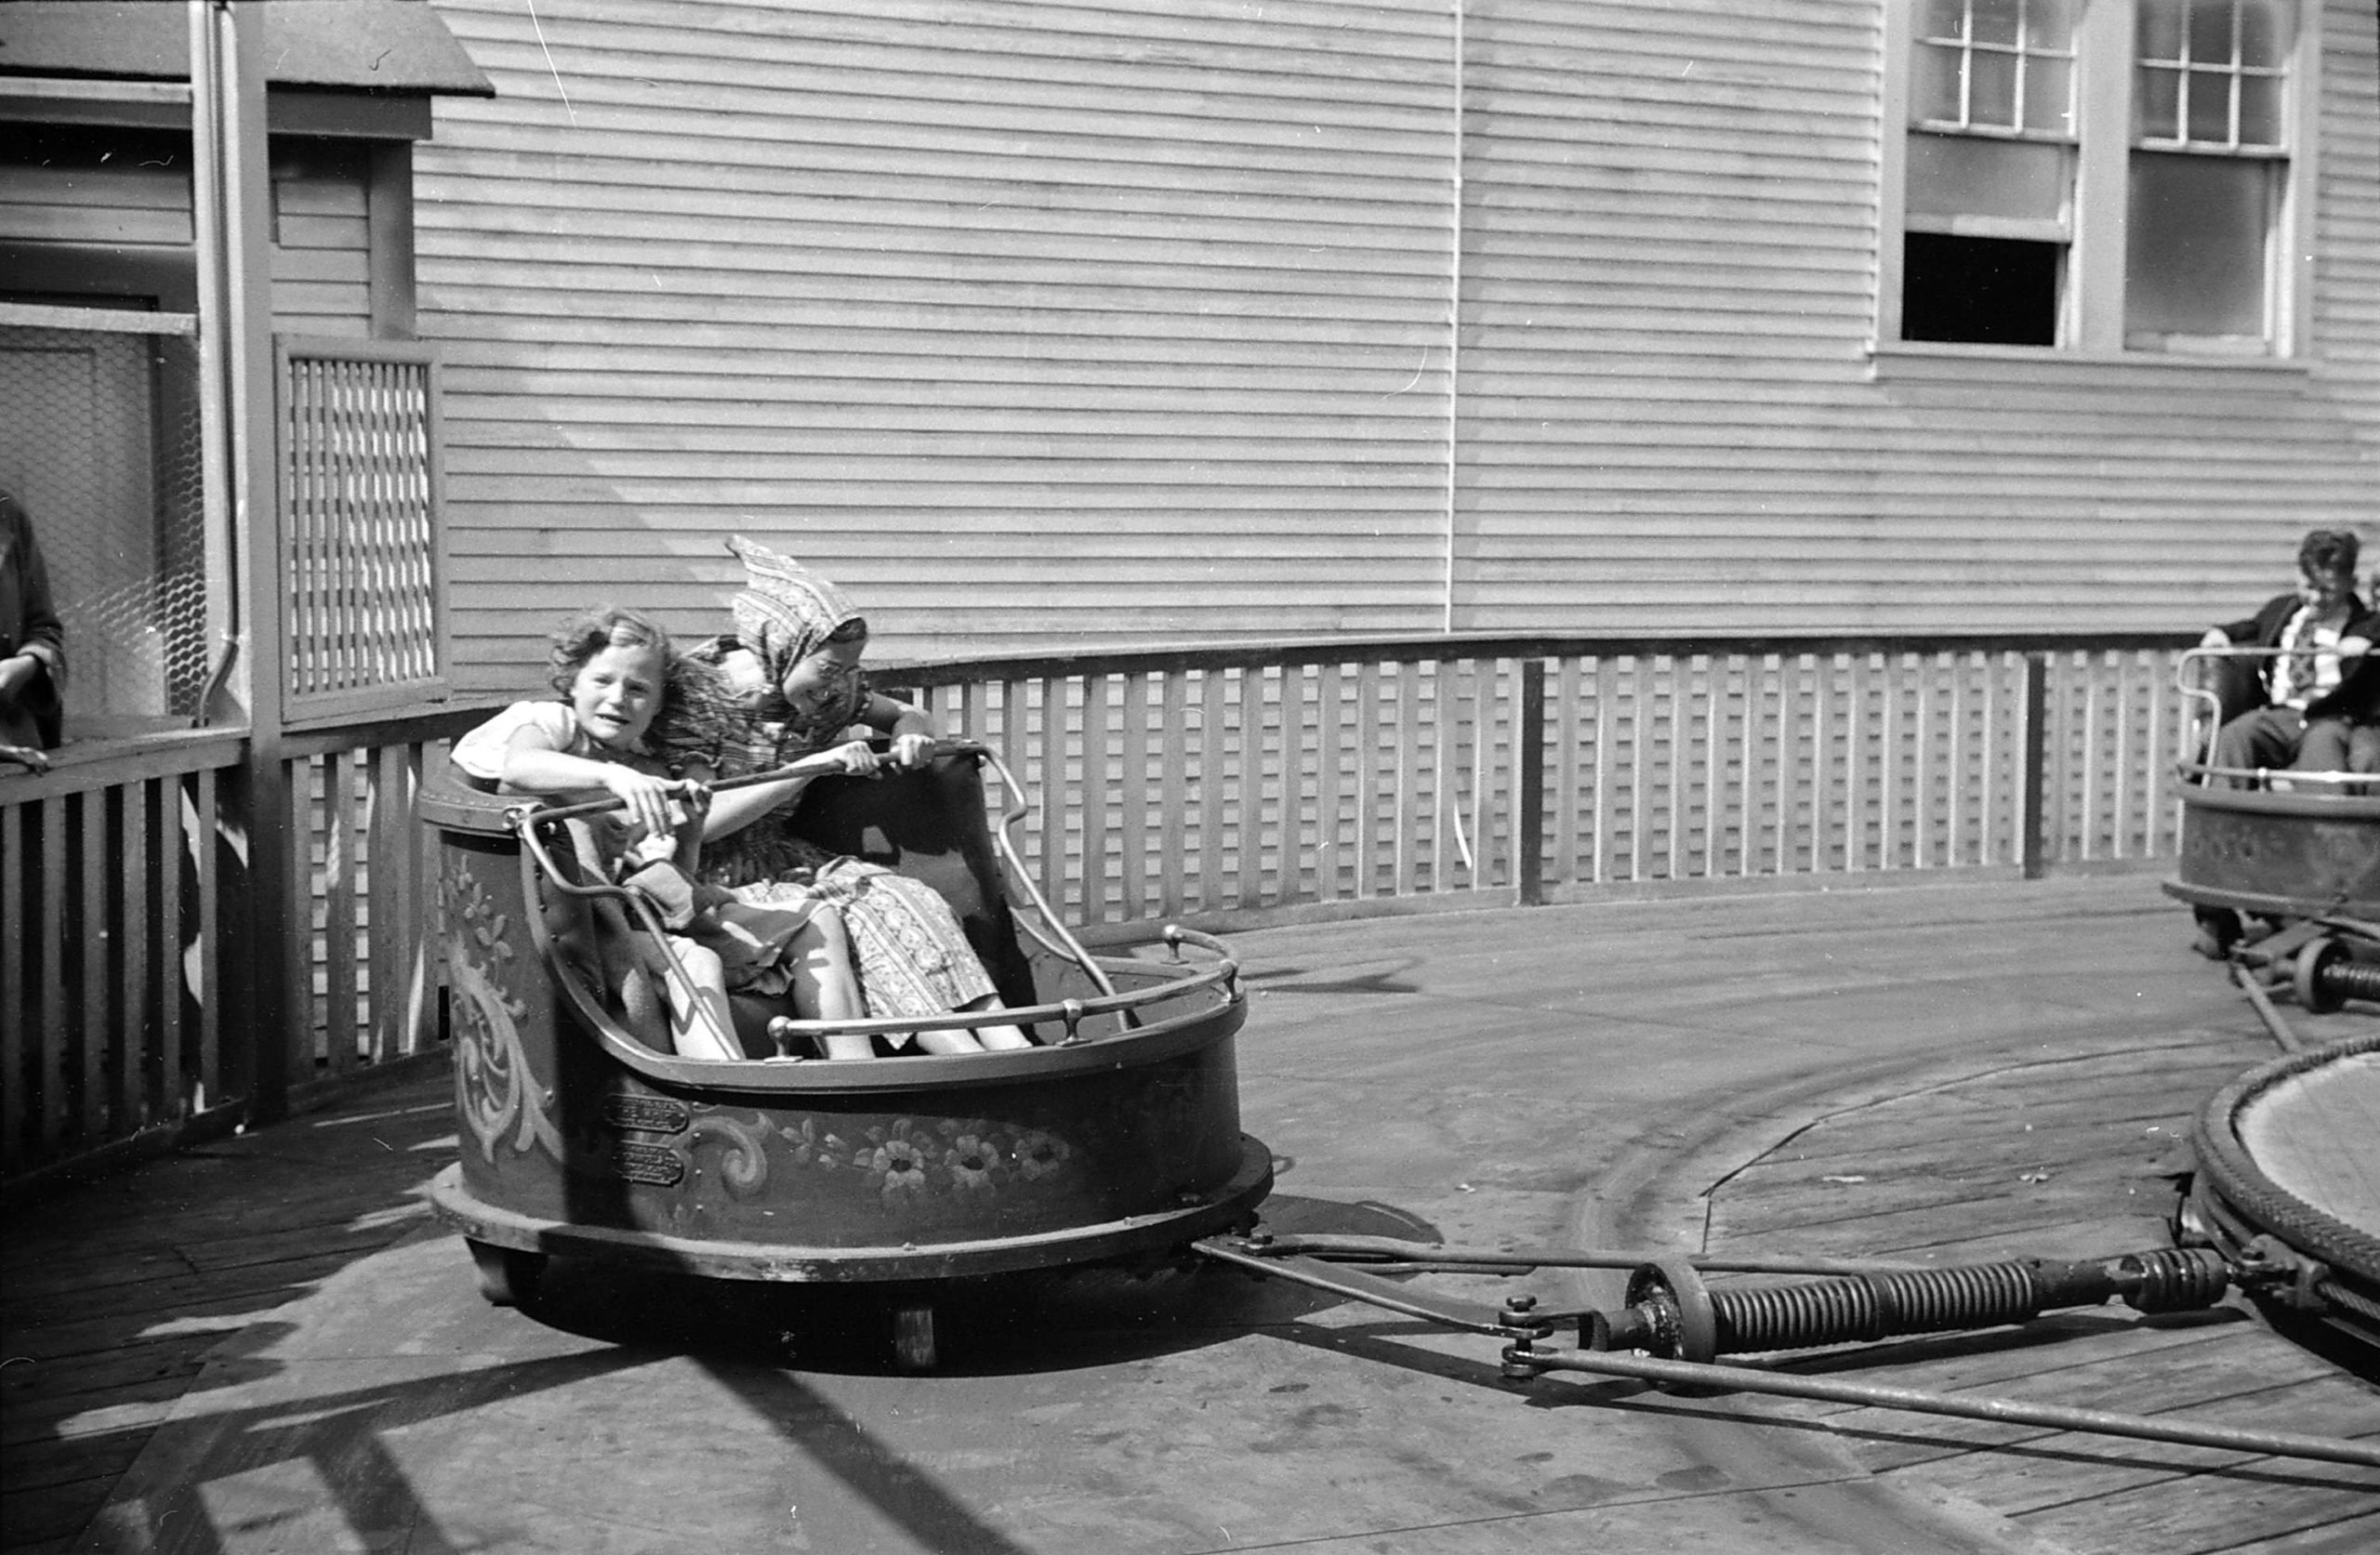 Two girls sit in a fair ride car swinging in a circle. One looks thrilled, while the other scared.